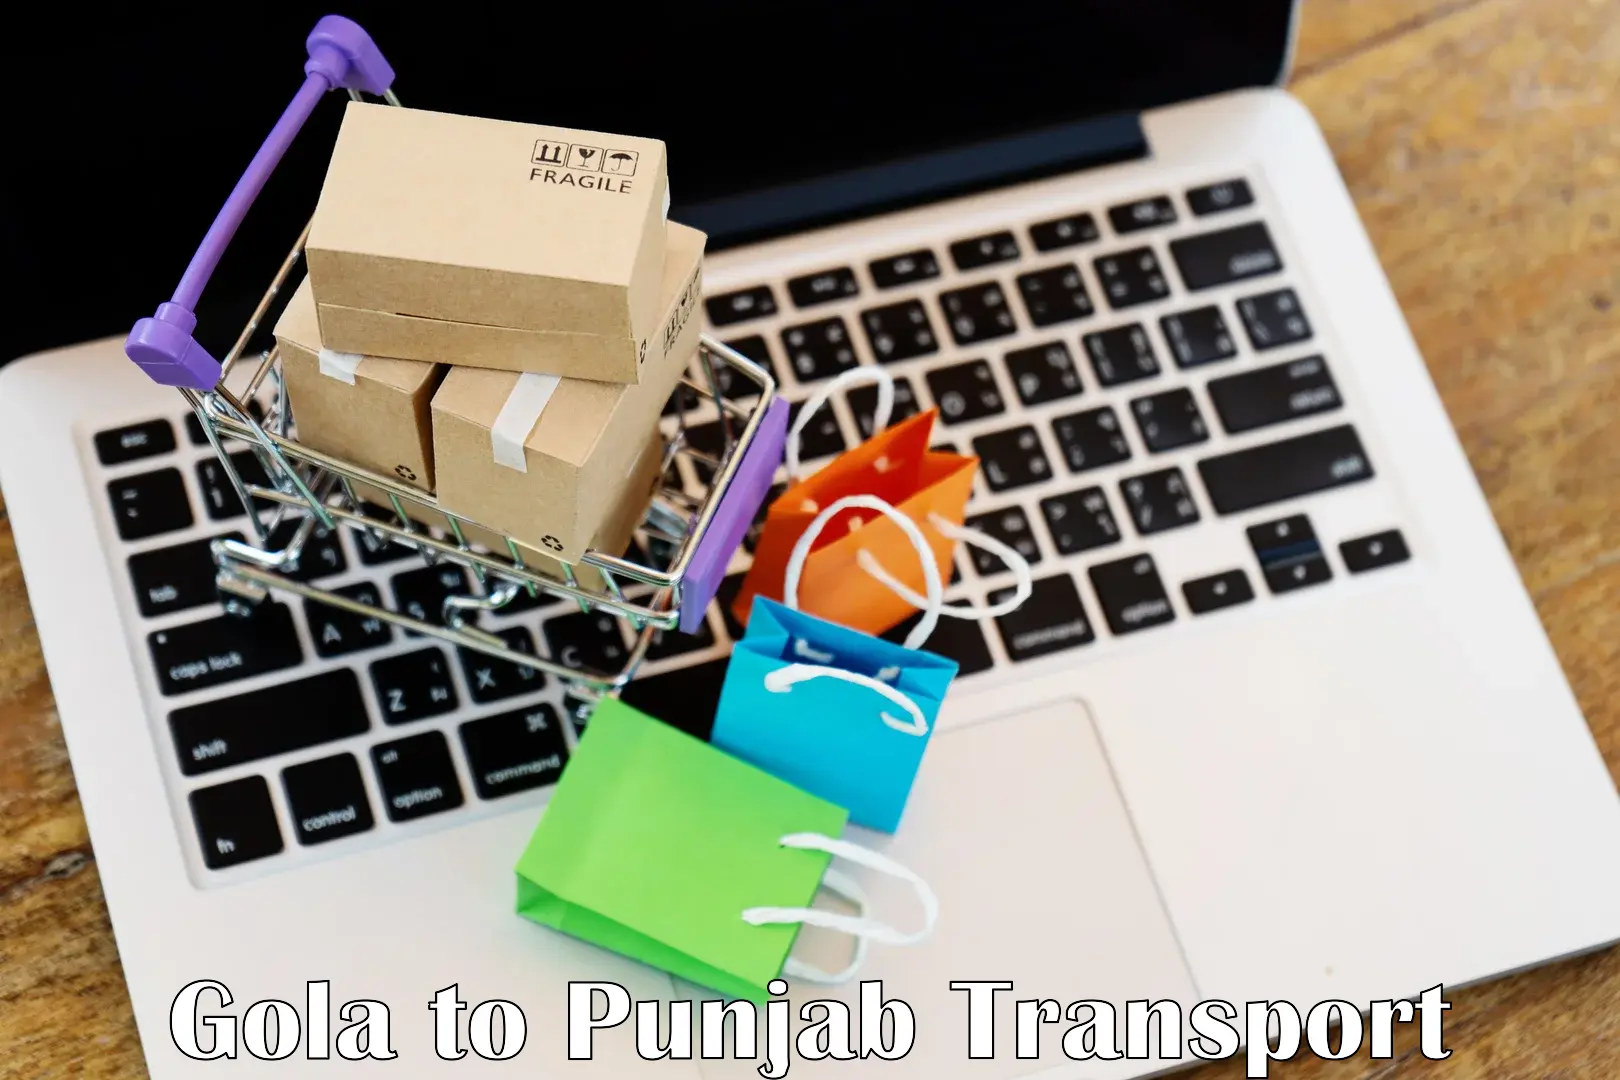 Truck transport companies in India Gola to Amritsar